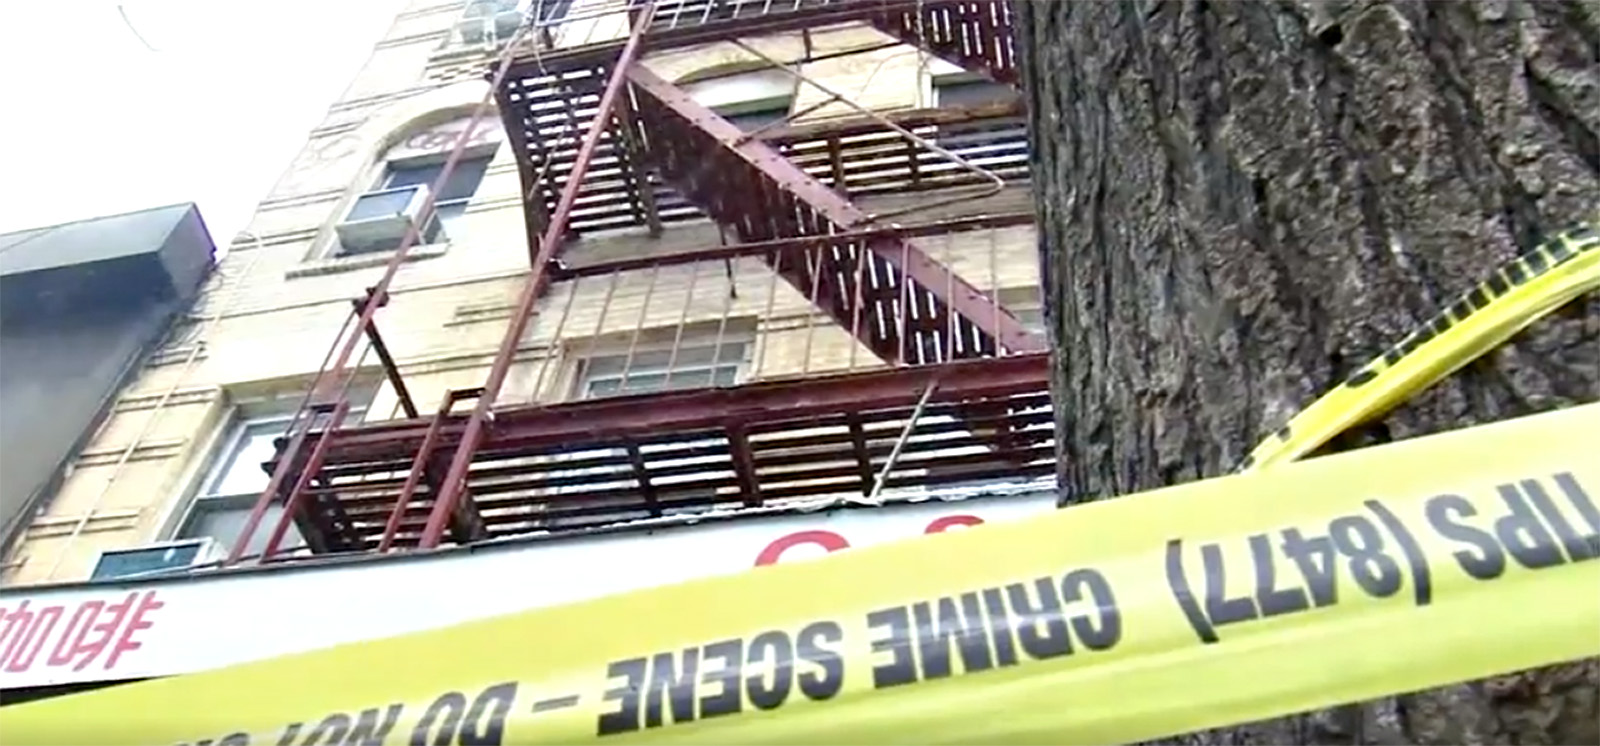 PHOTO: A woman was found stabbed to death on the Lower East Side on Manhattan in New York, Feb. 13, 2022, after police responded to a 911 call just before 4:30 a.m. The suspect Assamad Nash, 25, was caught trying to get away down the fire escape.